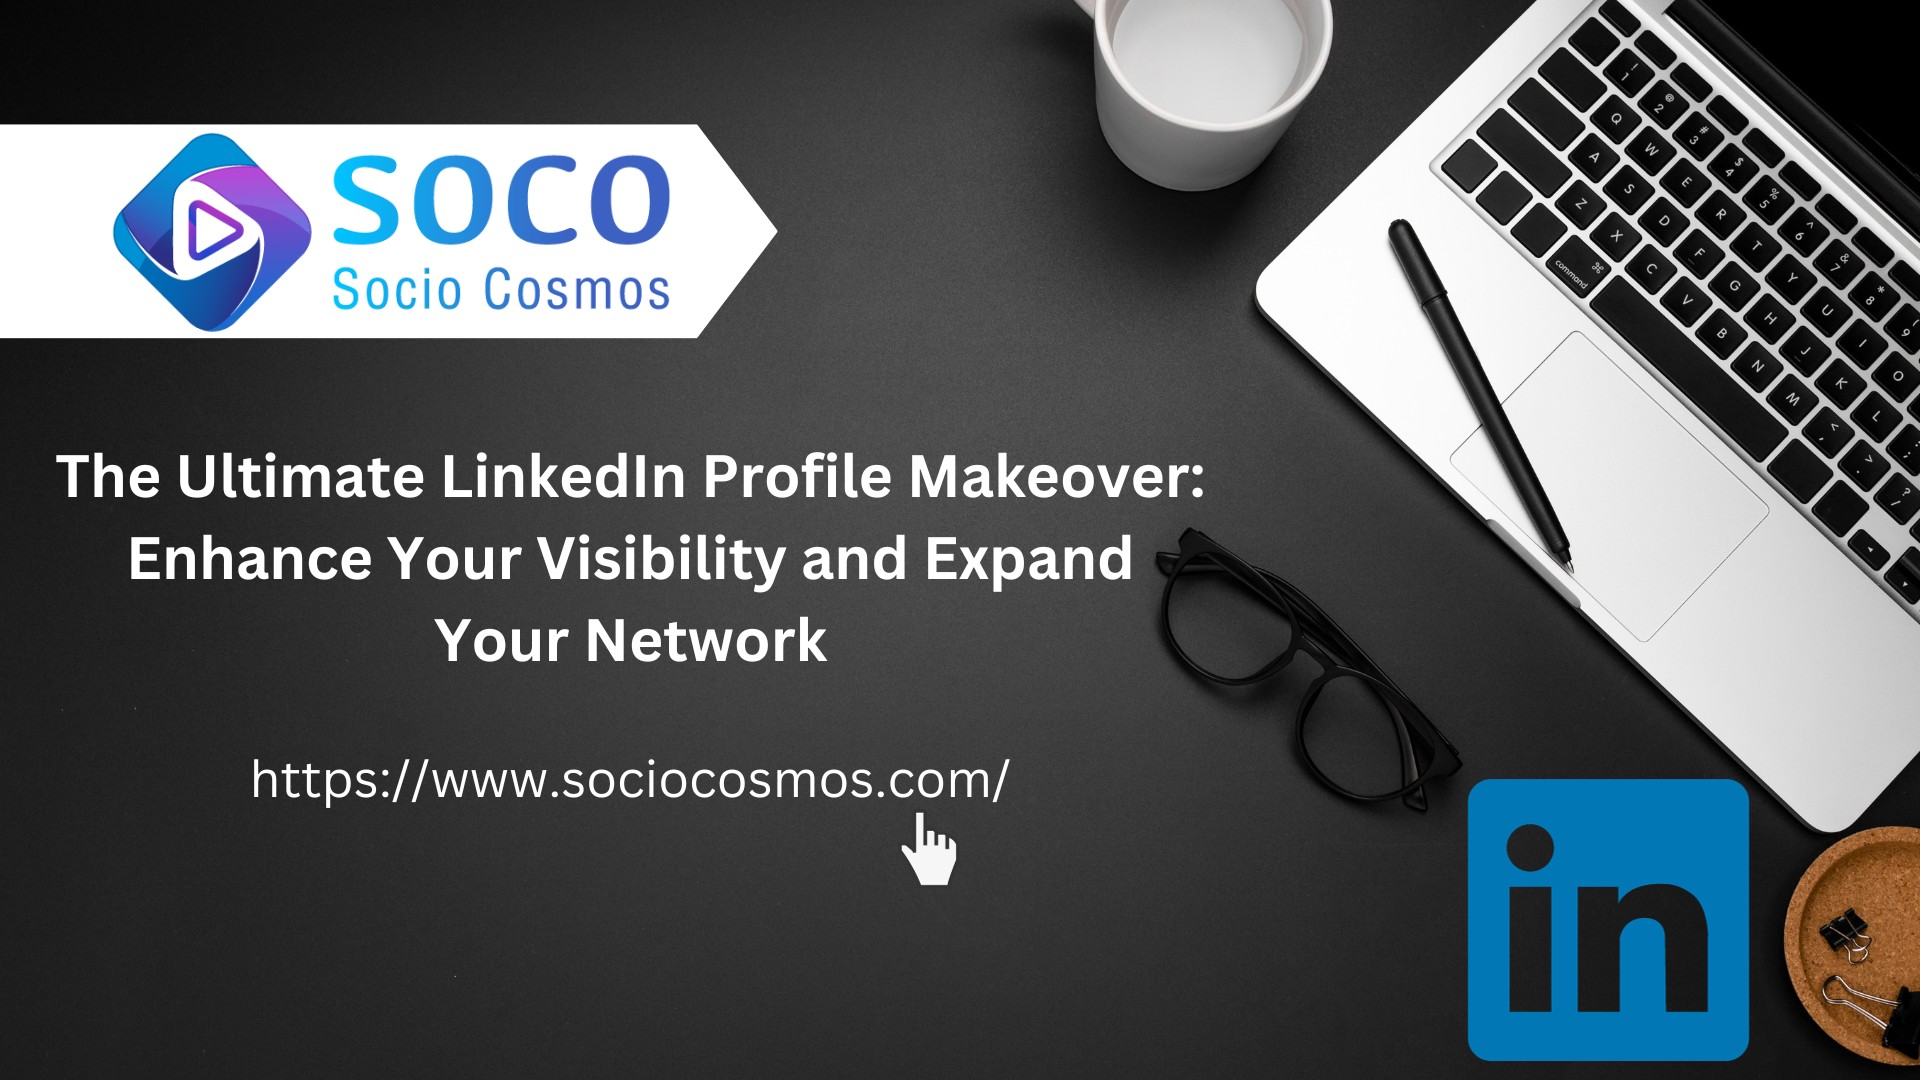 The Ultimate LinkedIn Profile Makeover: Enhance Your Visibility and Expand Your Network